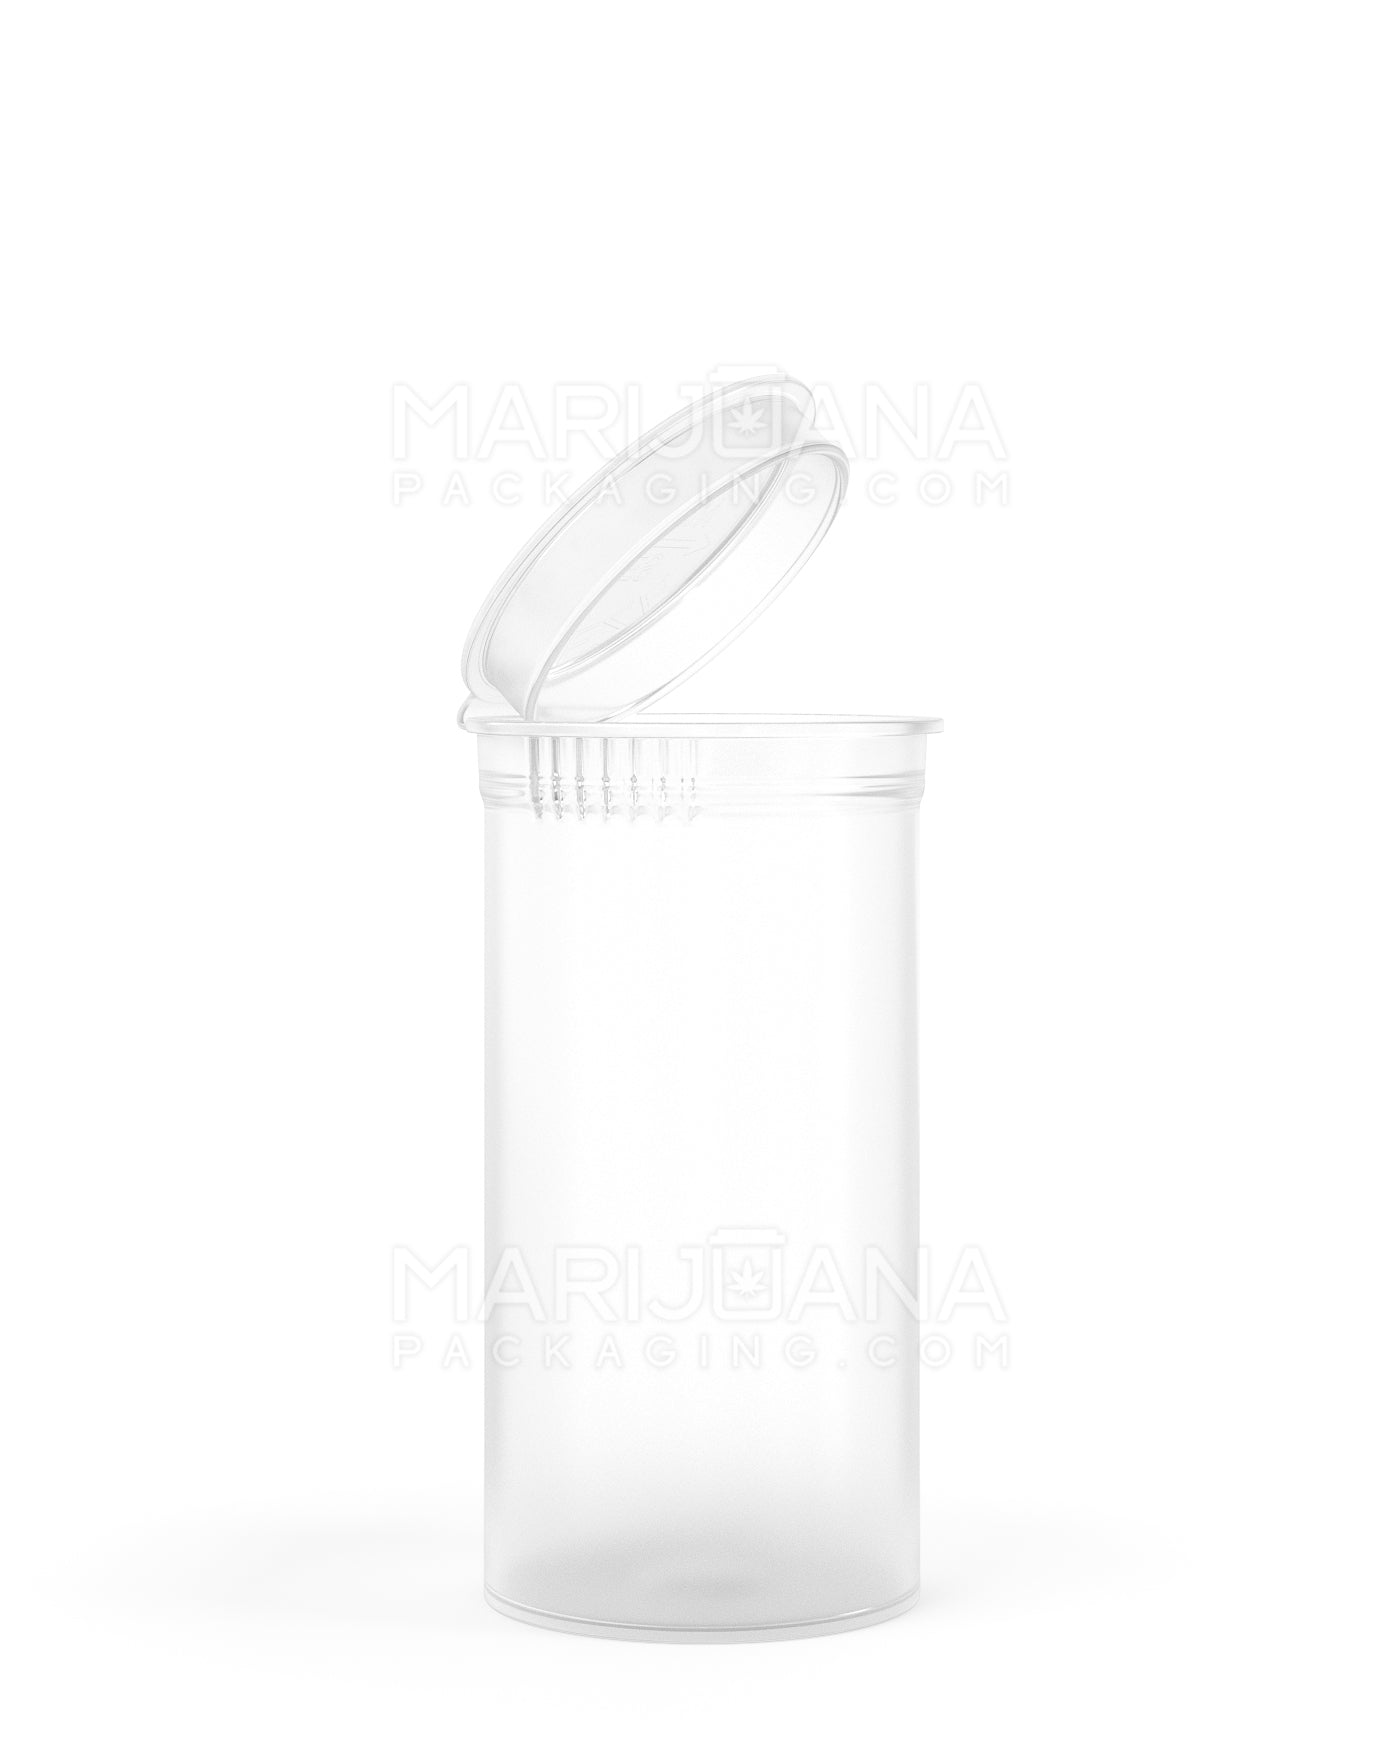 Child Resistant & Sustainable | 100% Biodegradable Clear Pop Top Bottles | 13dr - 2g - 315 Count - 1